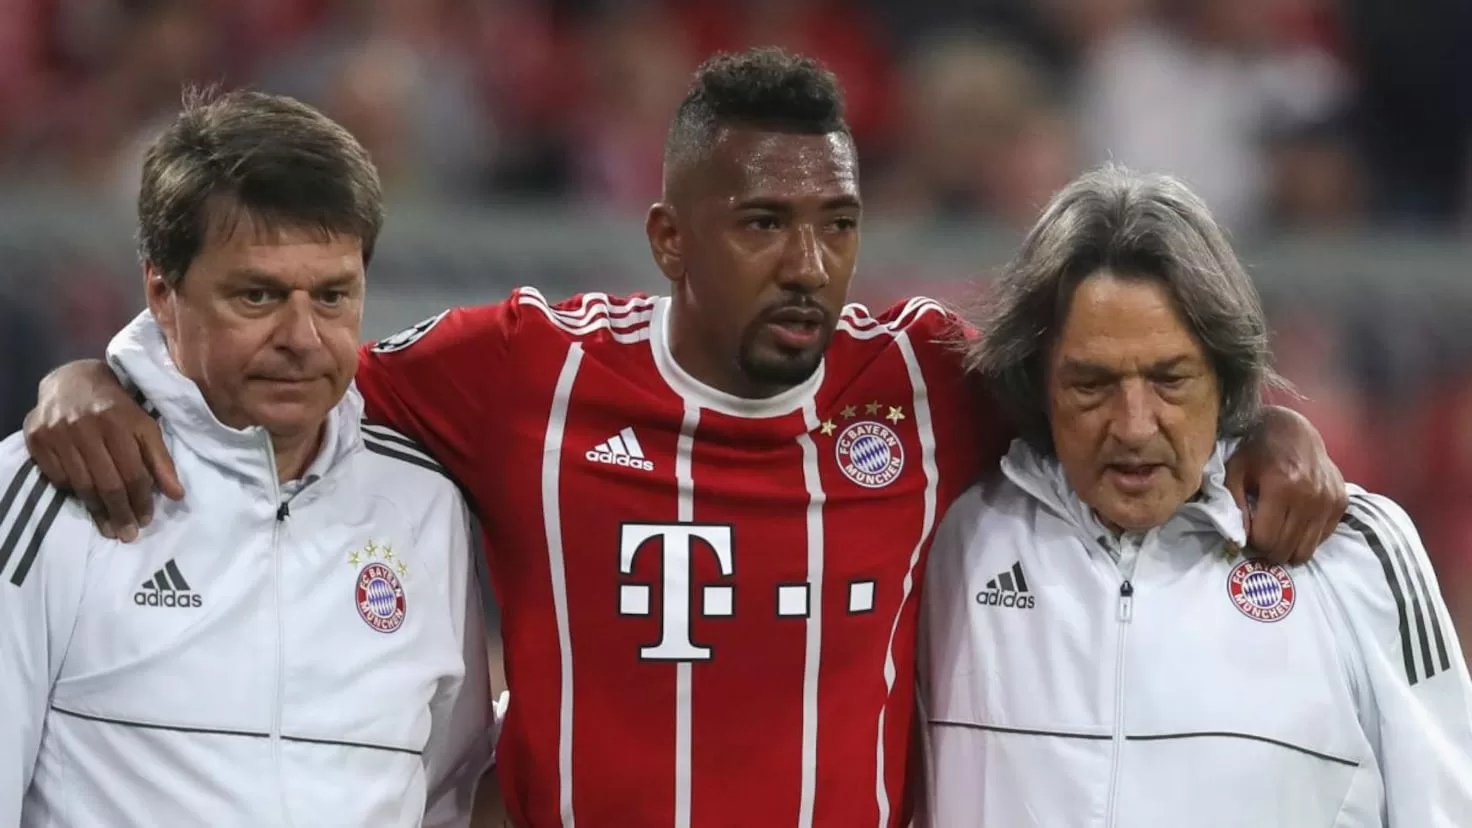 Boateng's mother: For years my son has been abusing women mentally and physically
